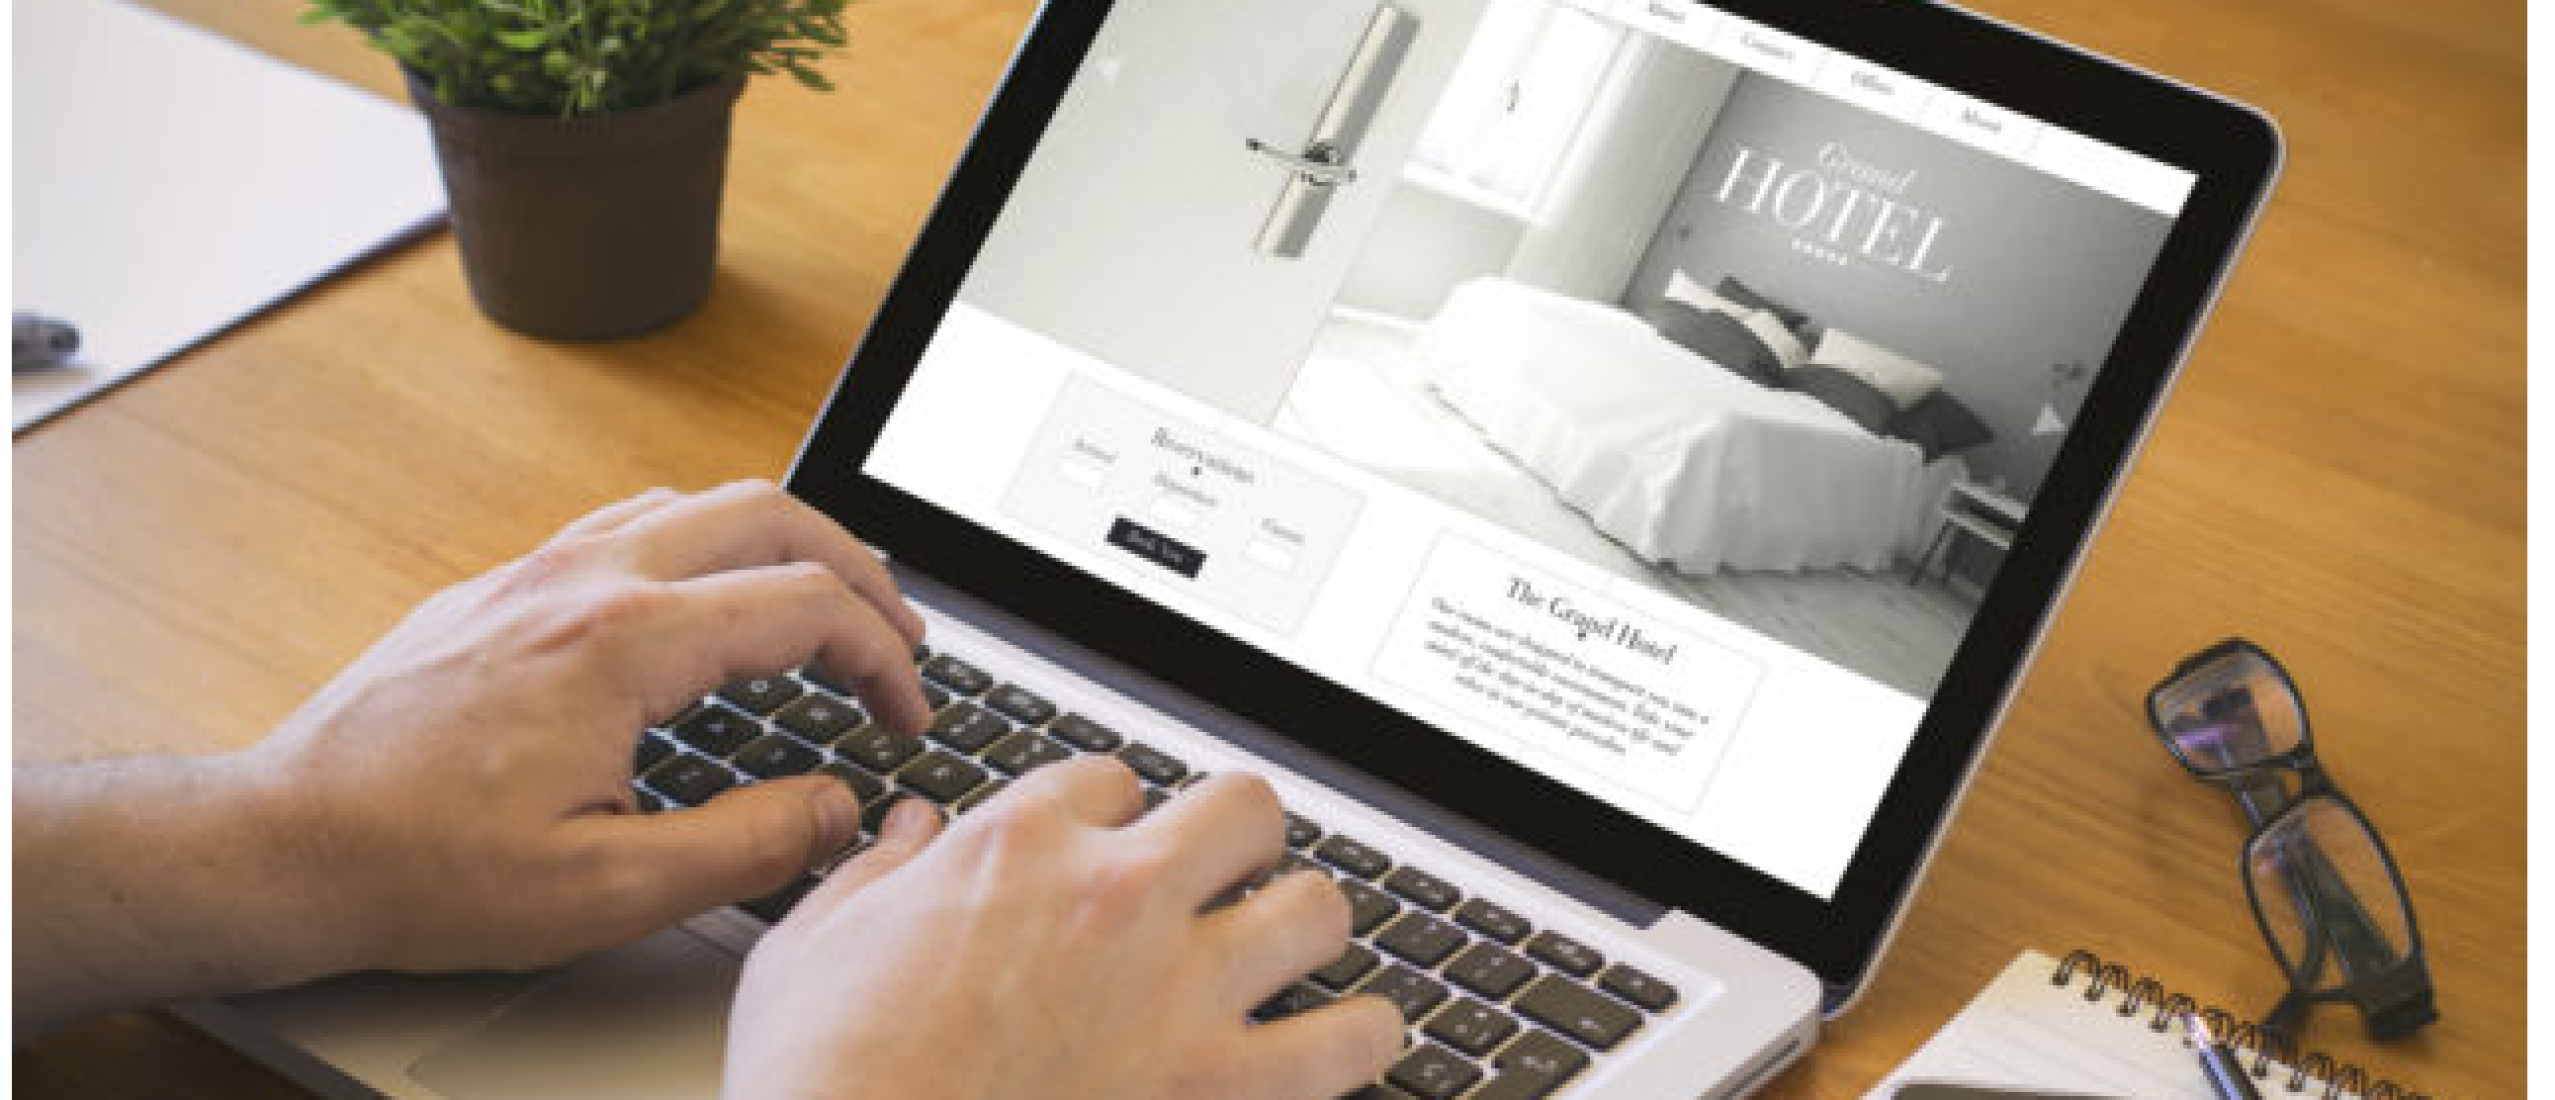 HOW TO BUILD A HOTEL WEBSITE THAT WILL ATTRACT GUESTS